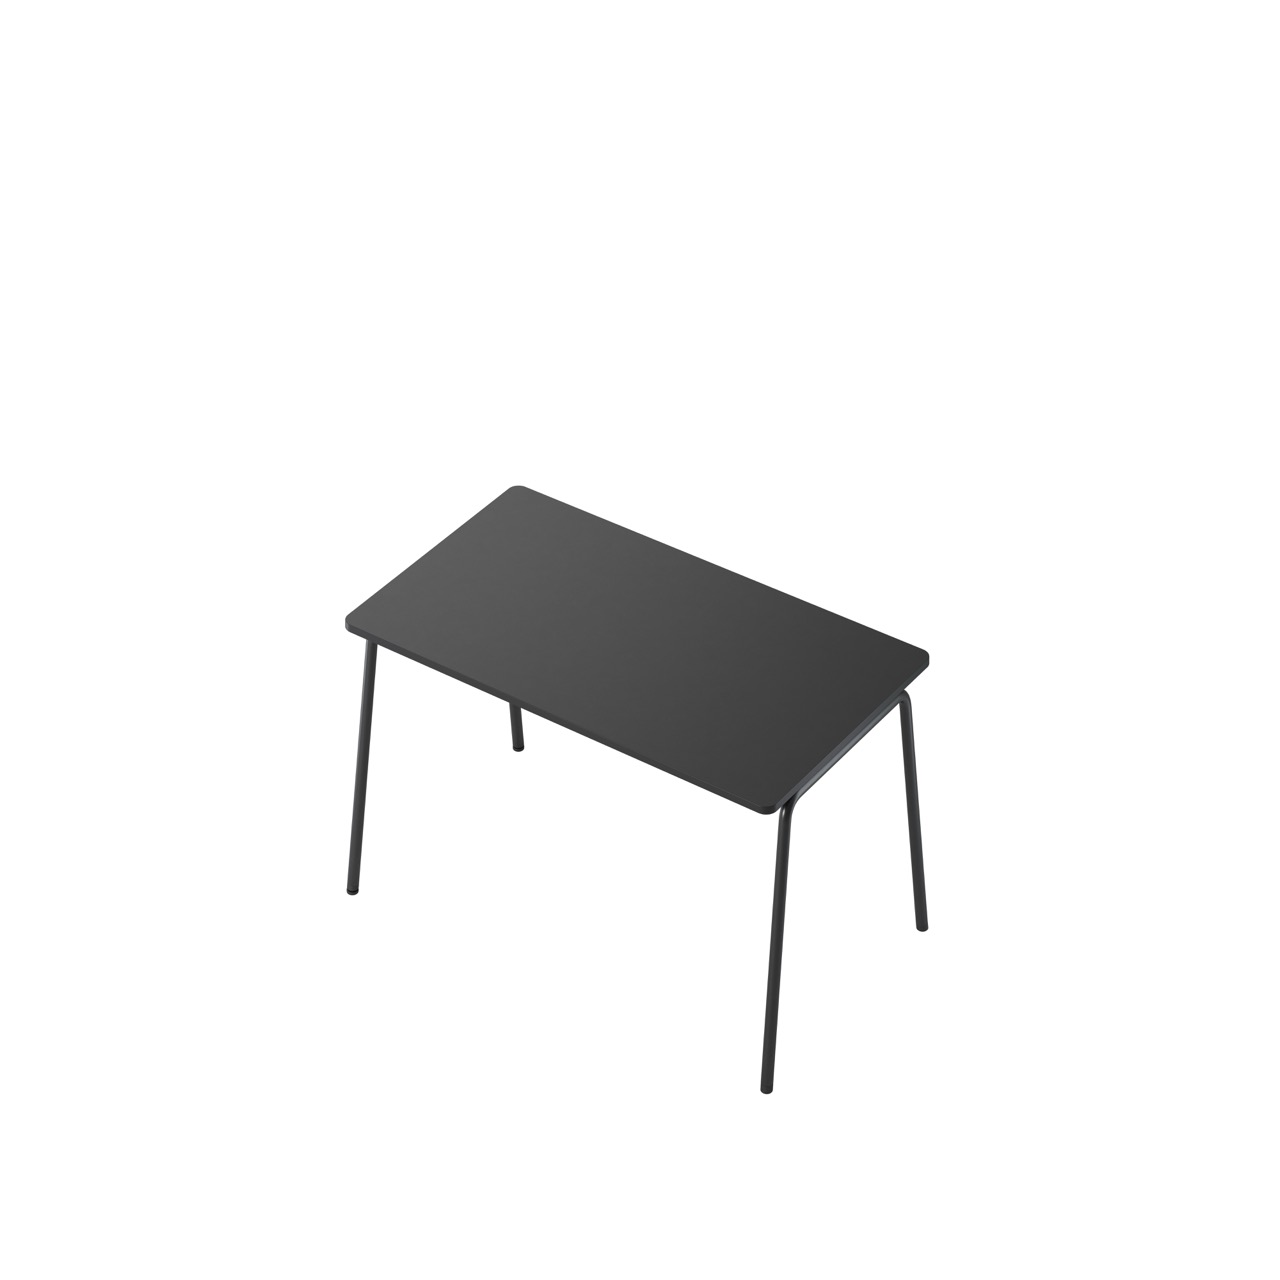 OCEE&FOUR - Tables - FourReal 74 - 140 x 80 - Angled - Packshot Image 6 Large